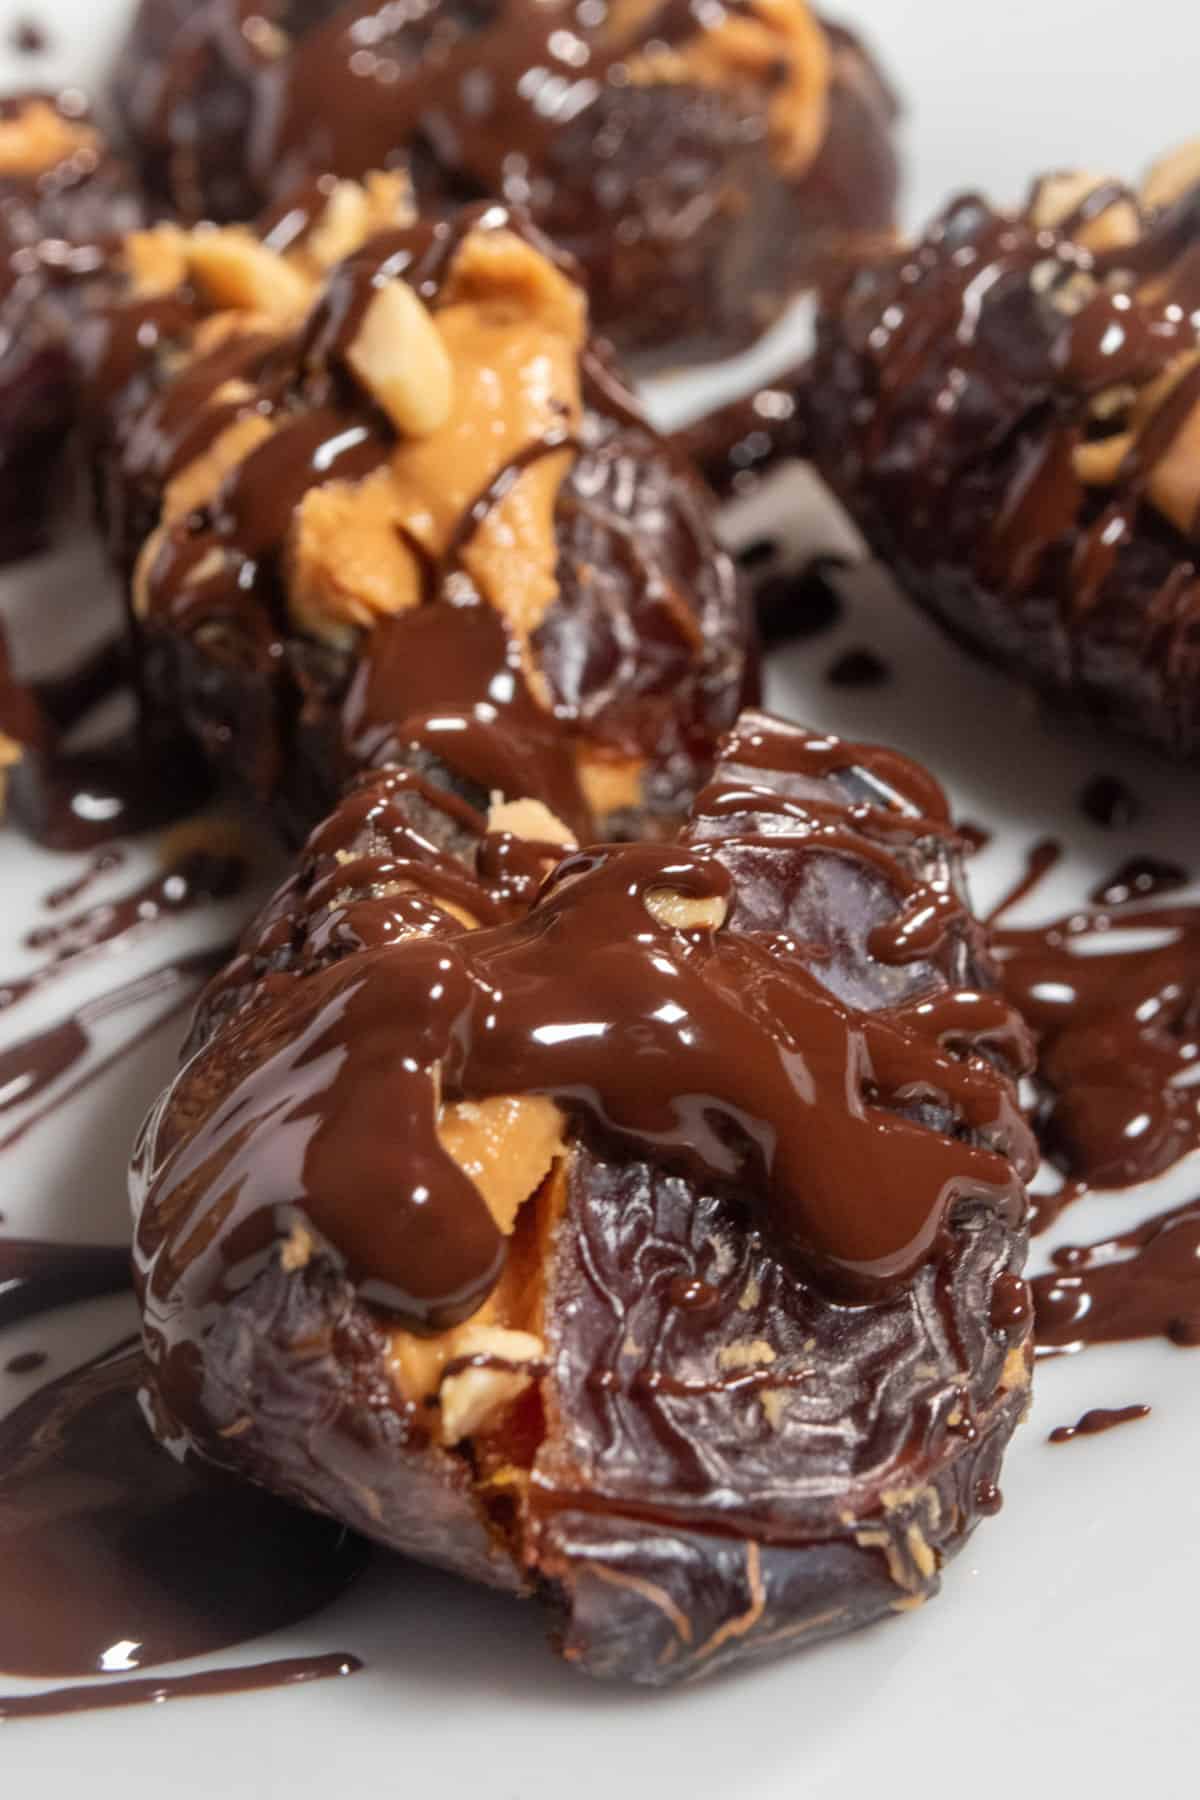 A zoomed in shot of chocolate drizzled dates. It looks a little messy but very delicious.